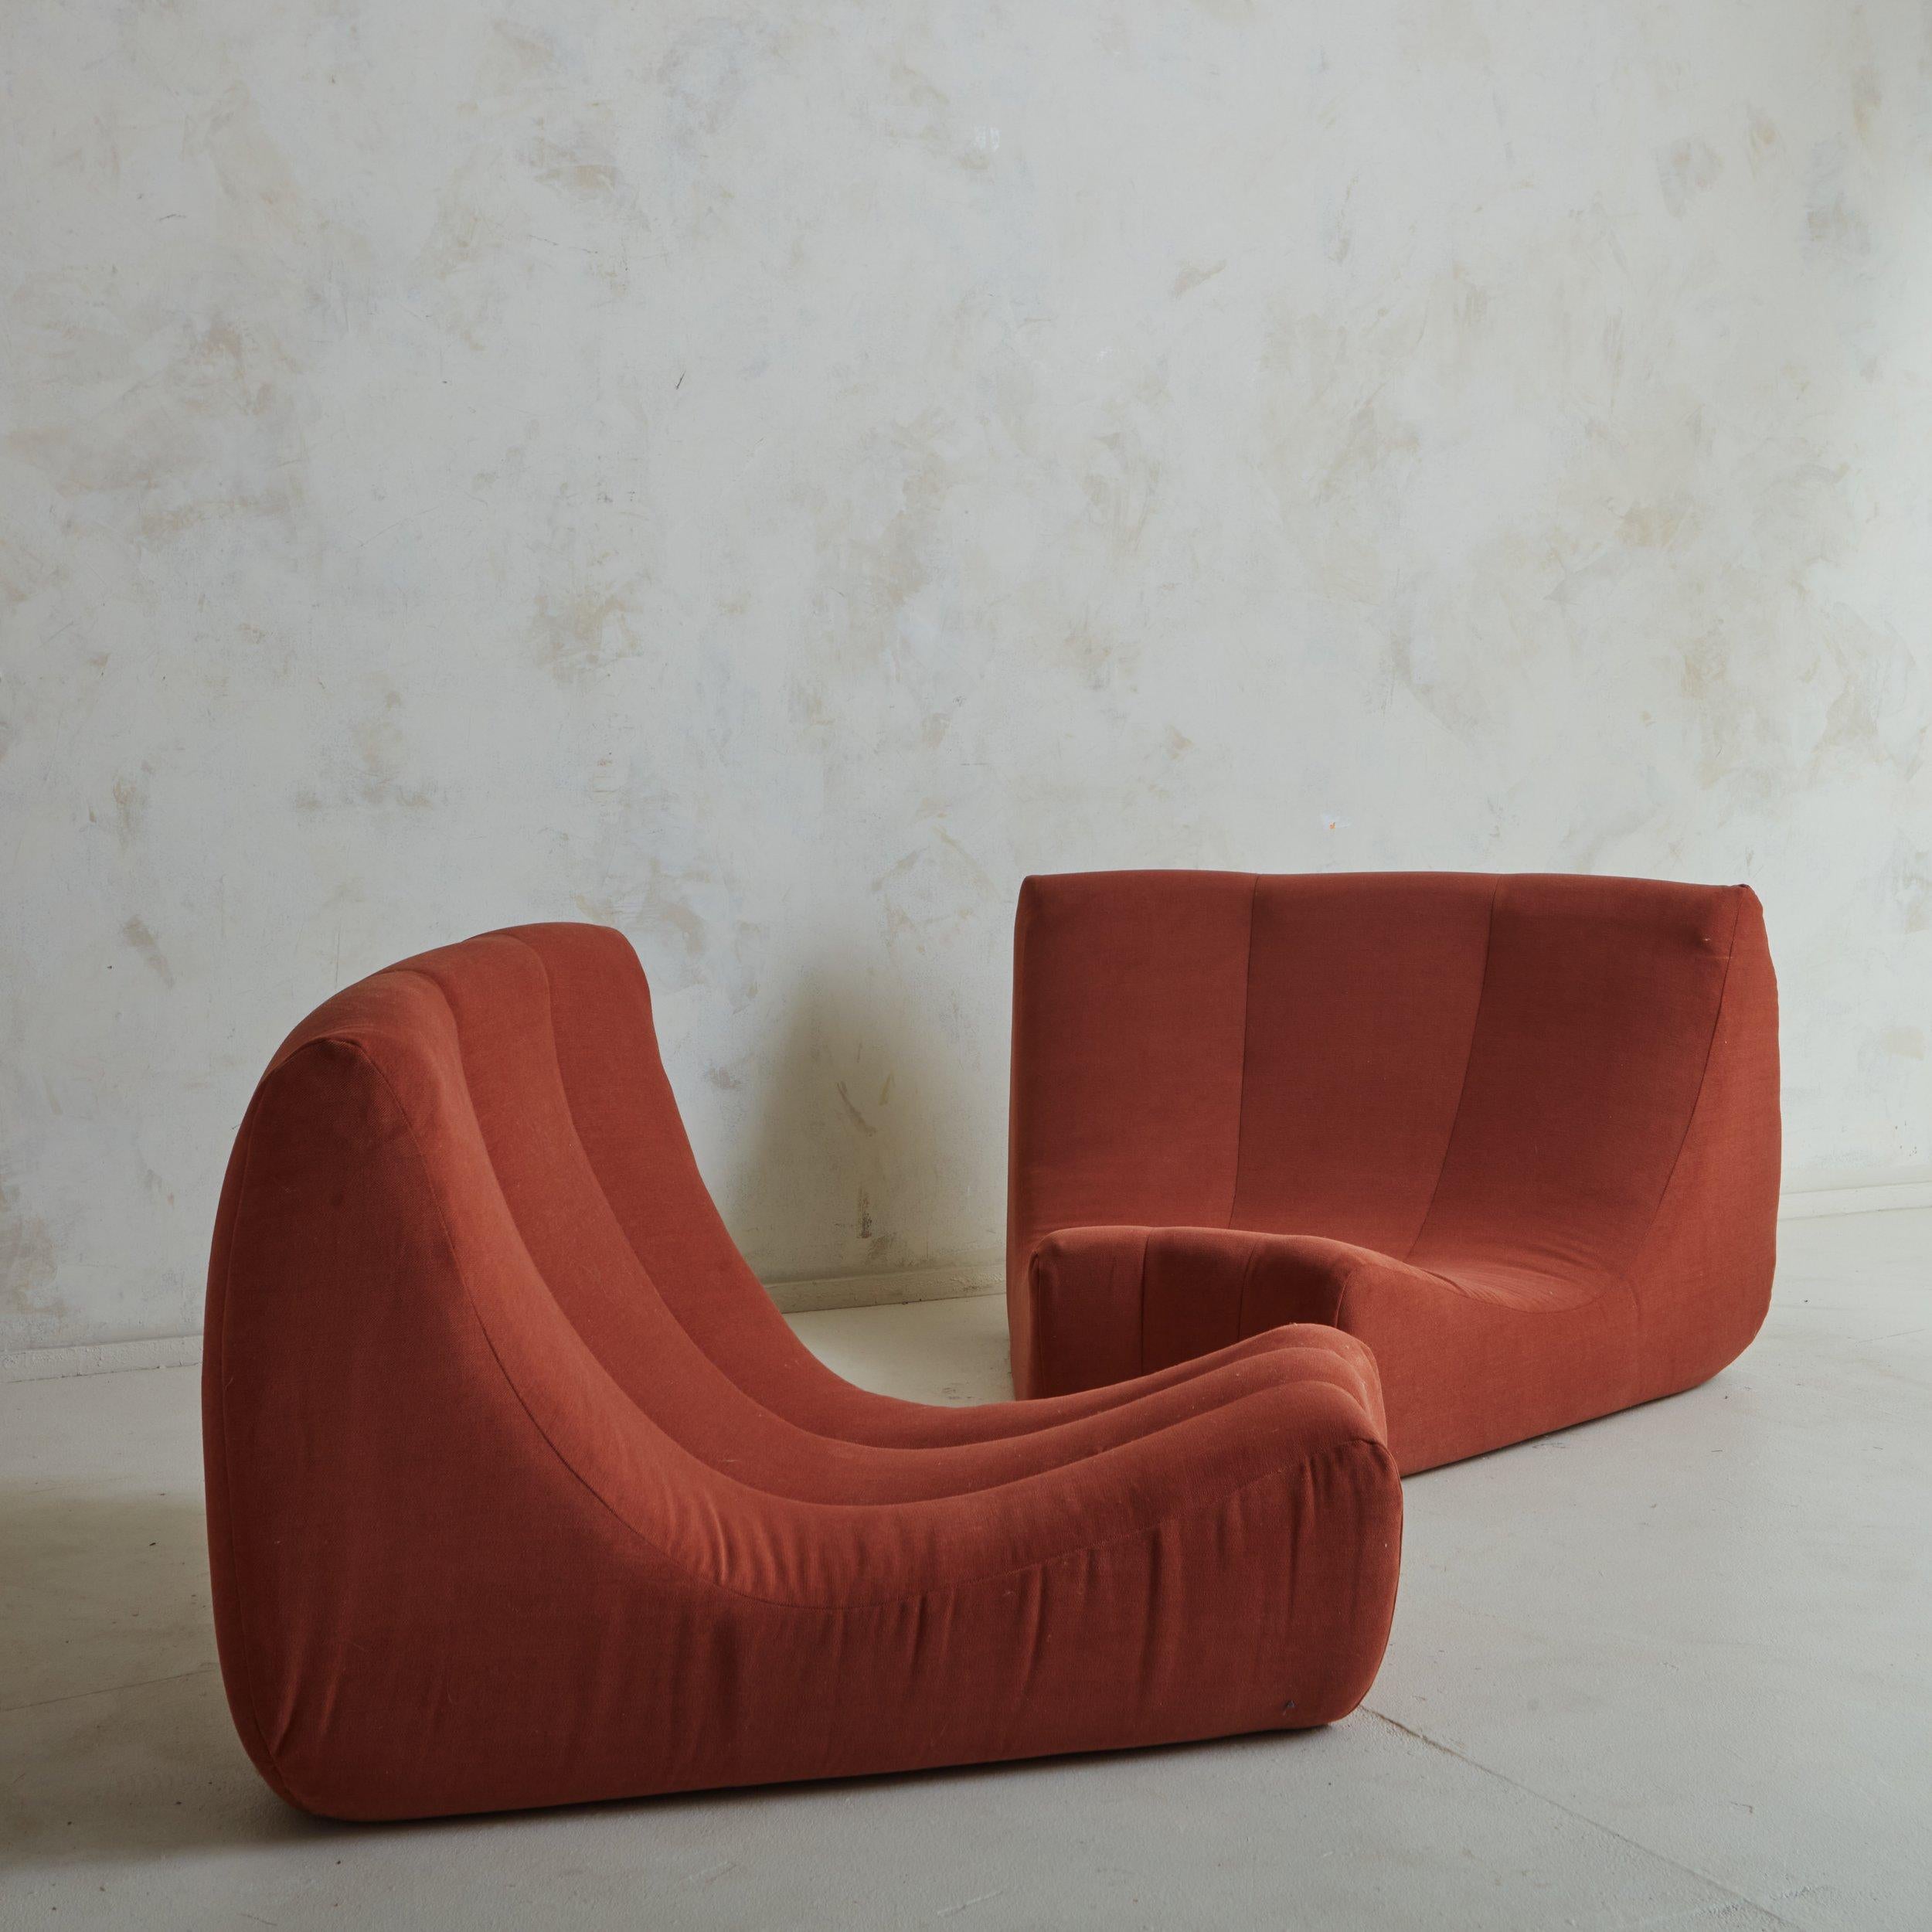 3-Piece 'Gilda' Sofa with Ottoman by Michel Ducaroy for Ligne Roset, France 1972 For Sale 1